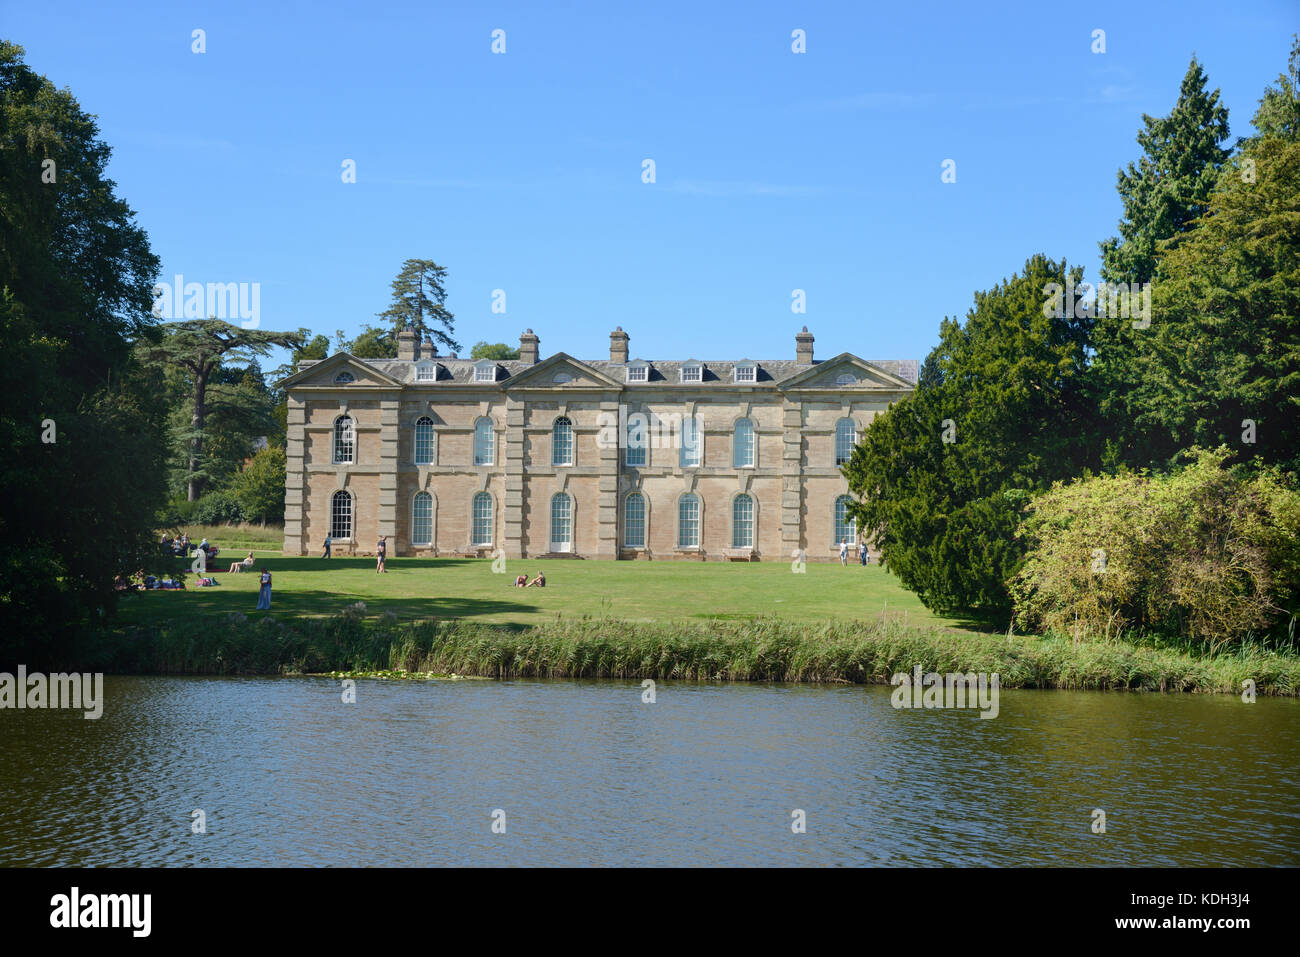 Southern Facade of Compton Verney House (1714) & Lake, a Country House, at Kineton, Warwickshire, England Stock Photo